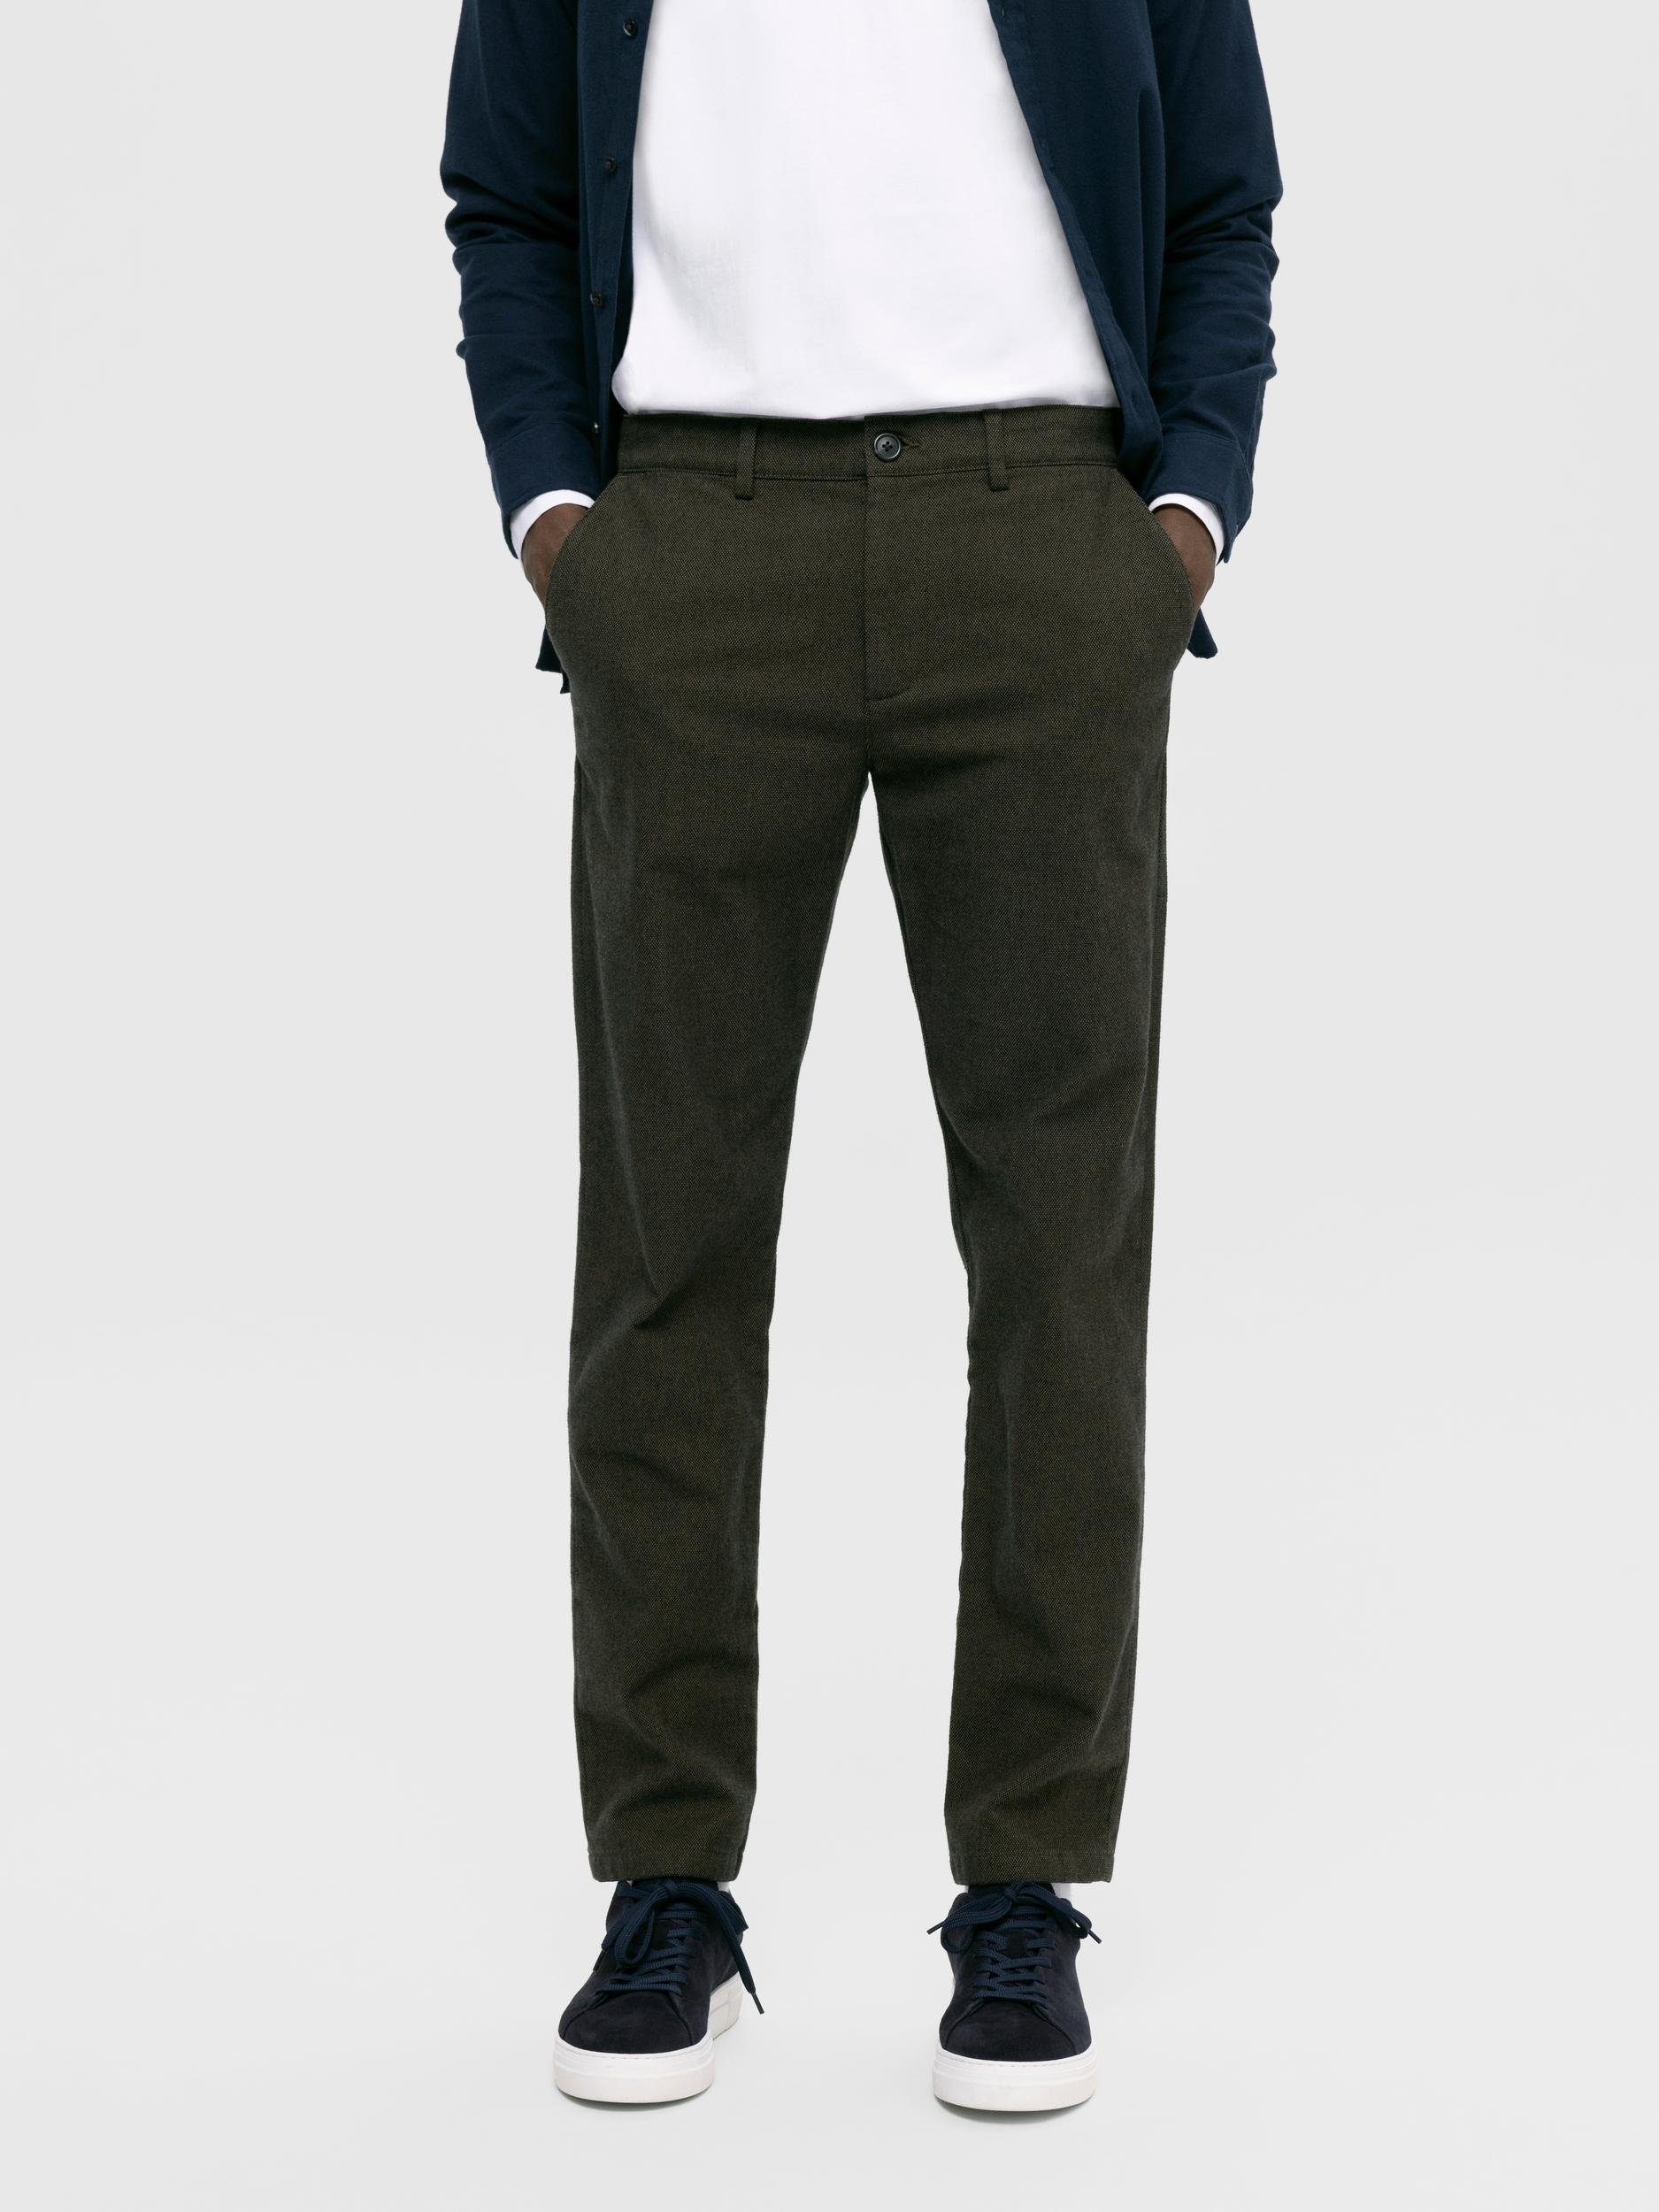 SELECTED HOMME Chinohose BRUSHED 175 night CHINO FIT forest SLIM